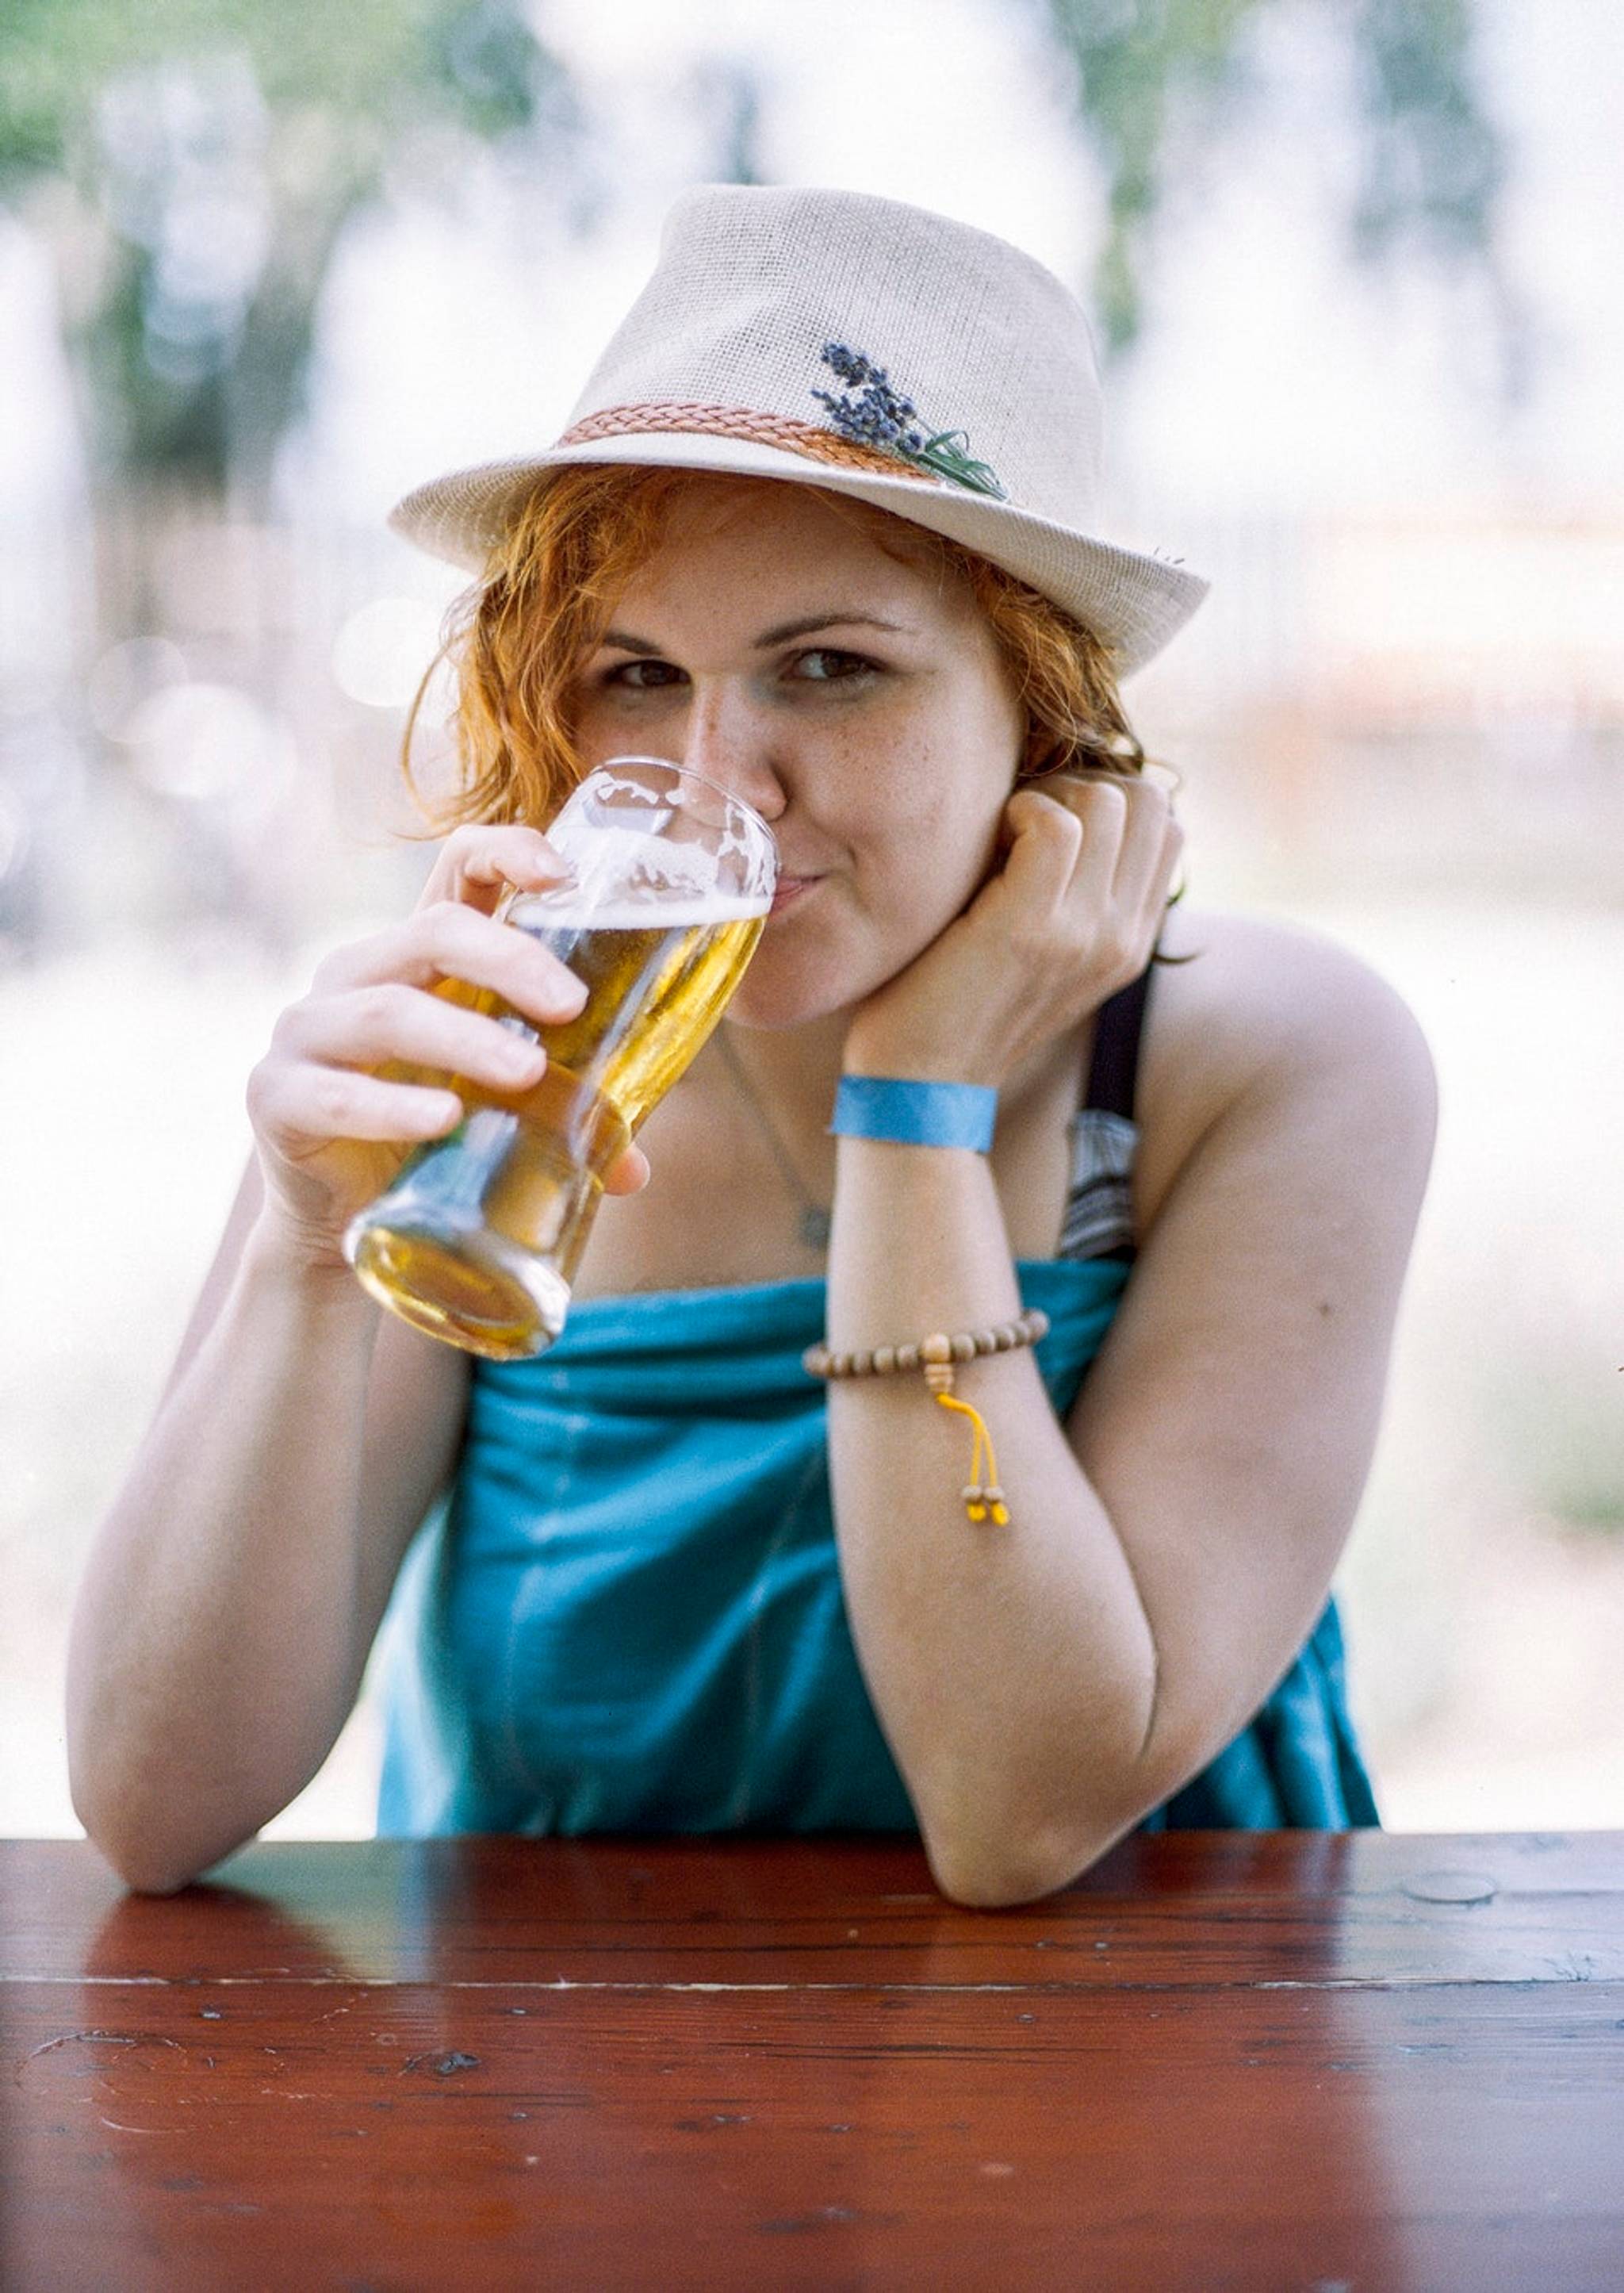 Americans are split on whether boozing is healthy